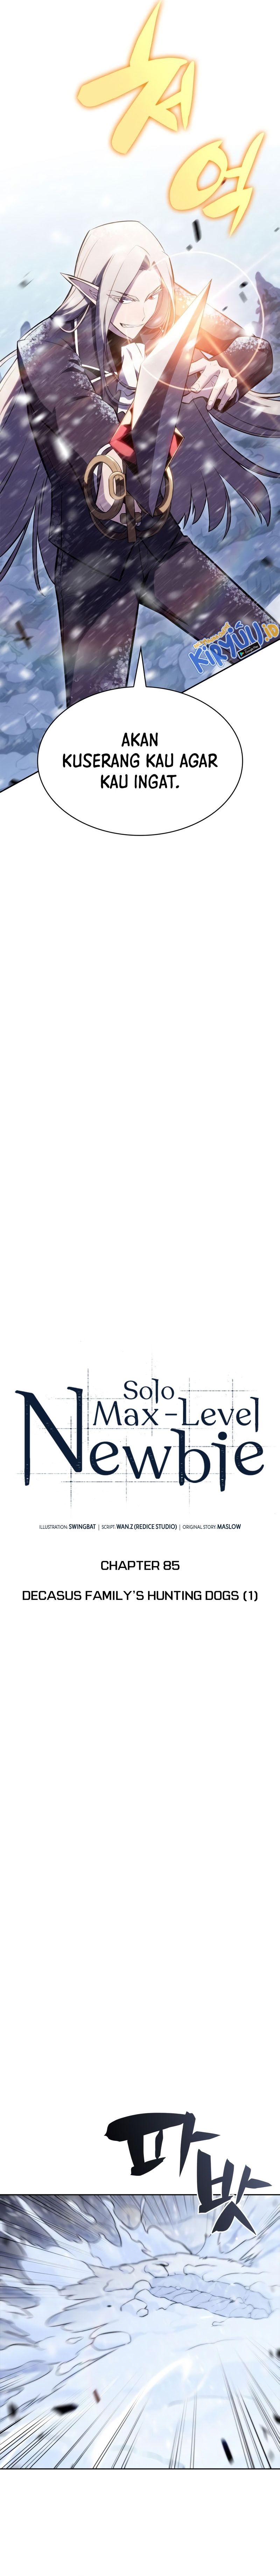 Solo Max-Level Newbie Chapter 85 12